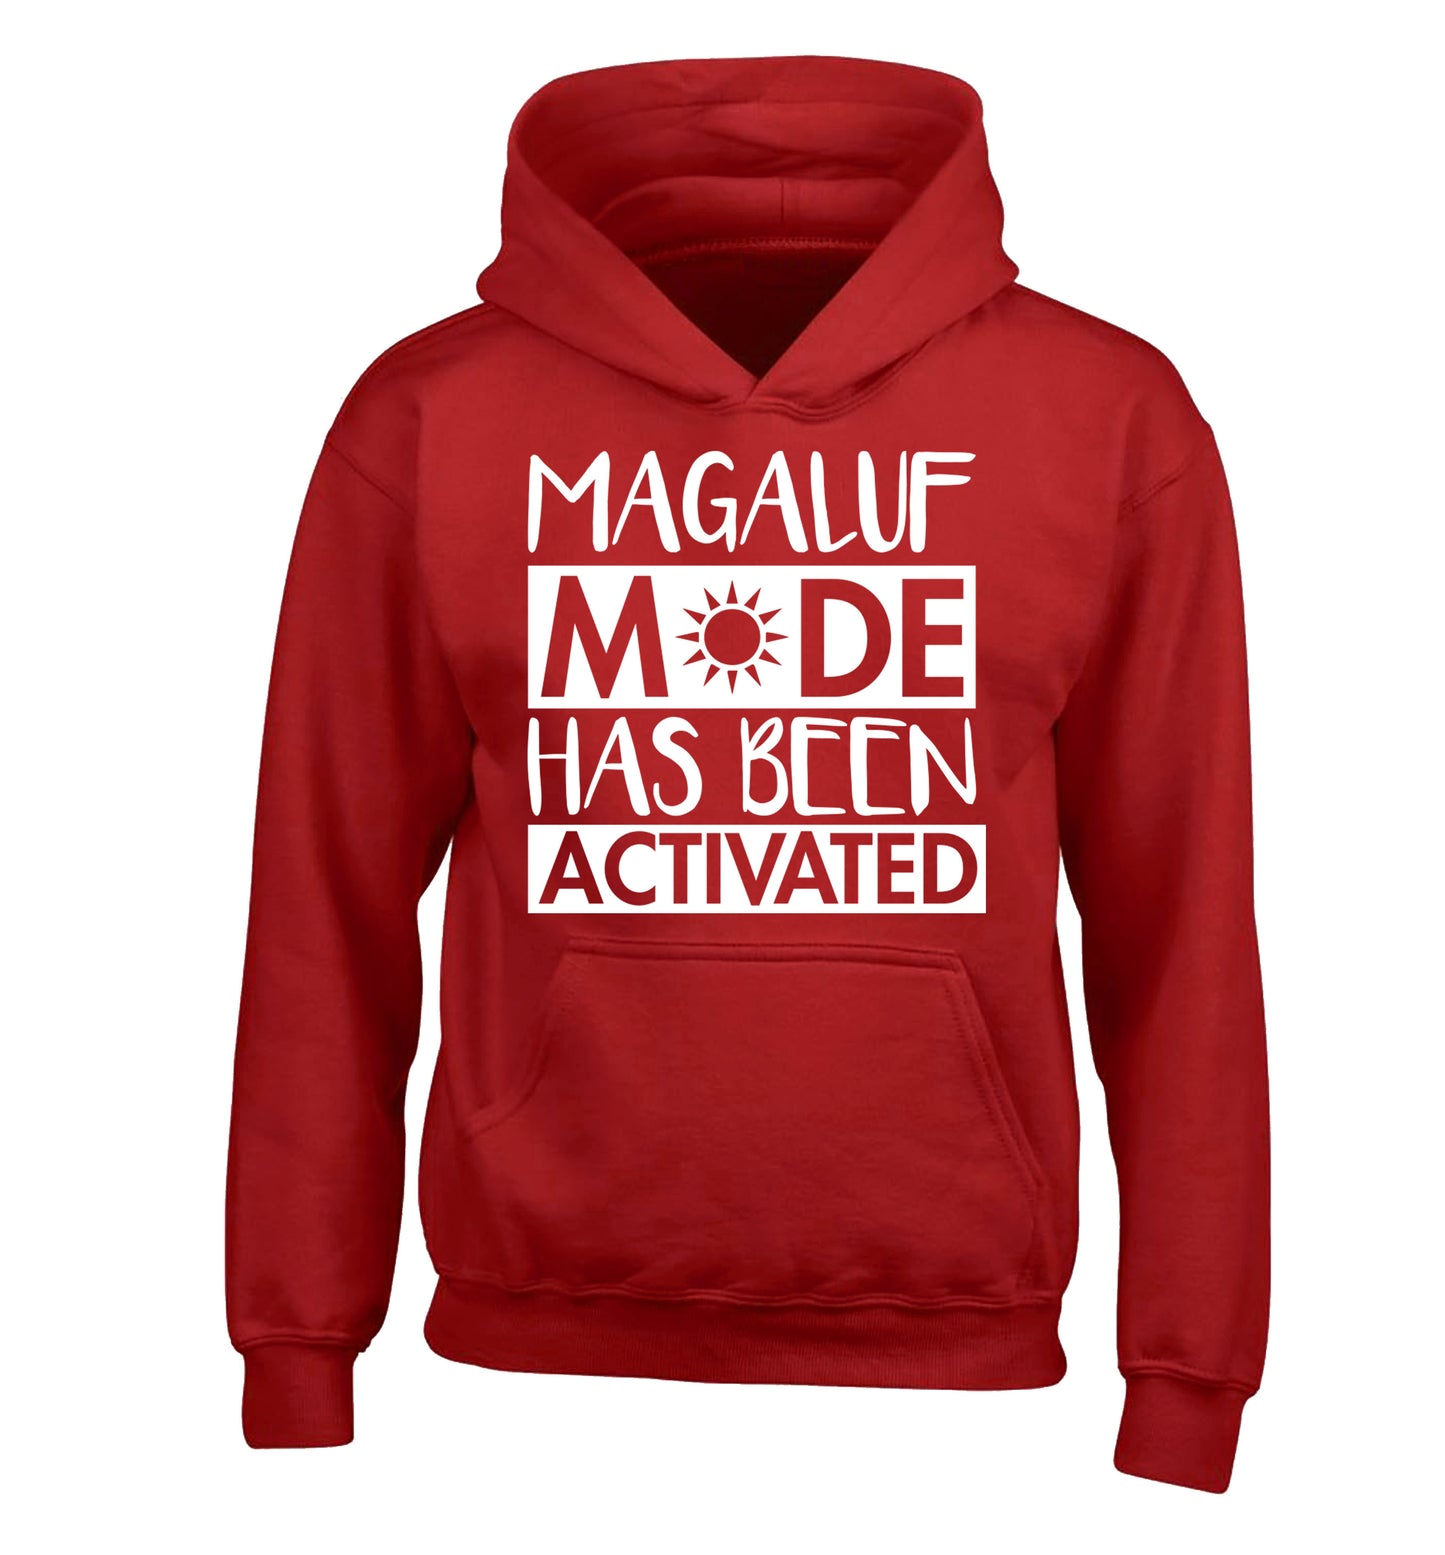 Magaluf mode has been activated children's red hoodie 12-13 Years